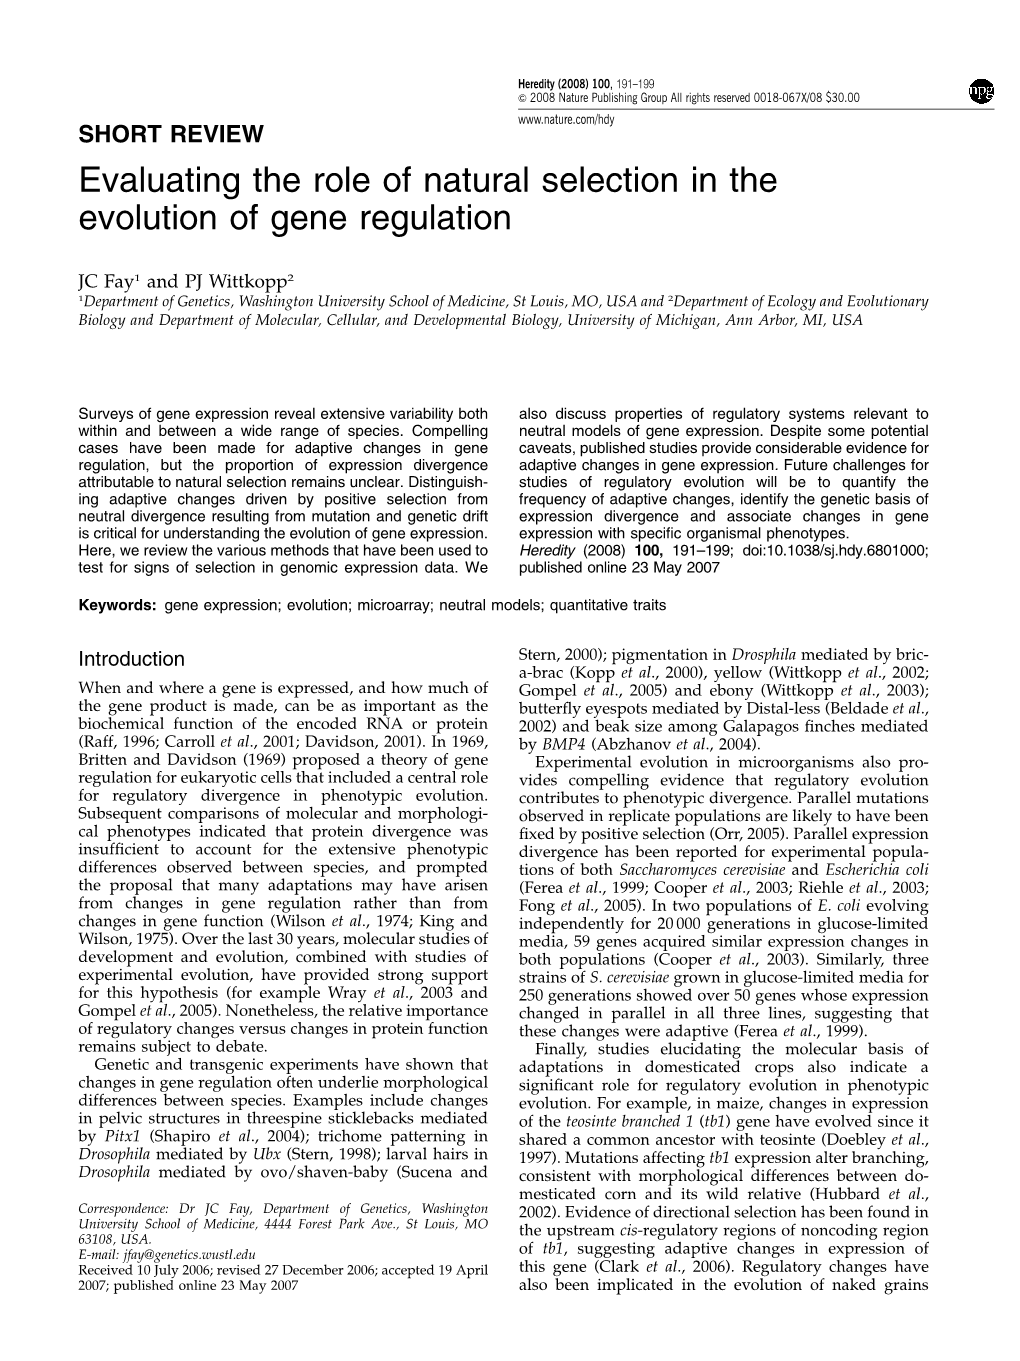 Evaluating the Role of Natural Selection in the Evolution of Gene Regulation